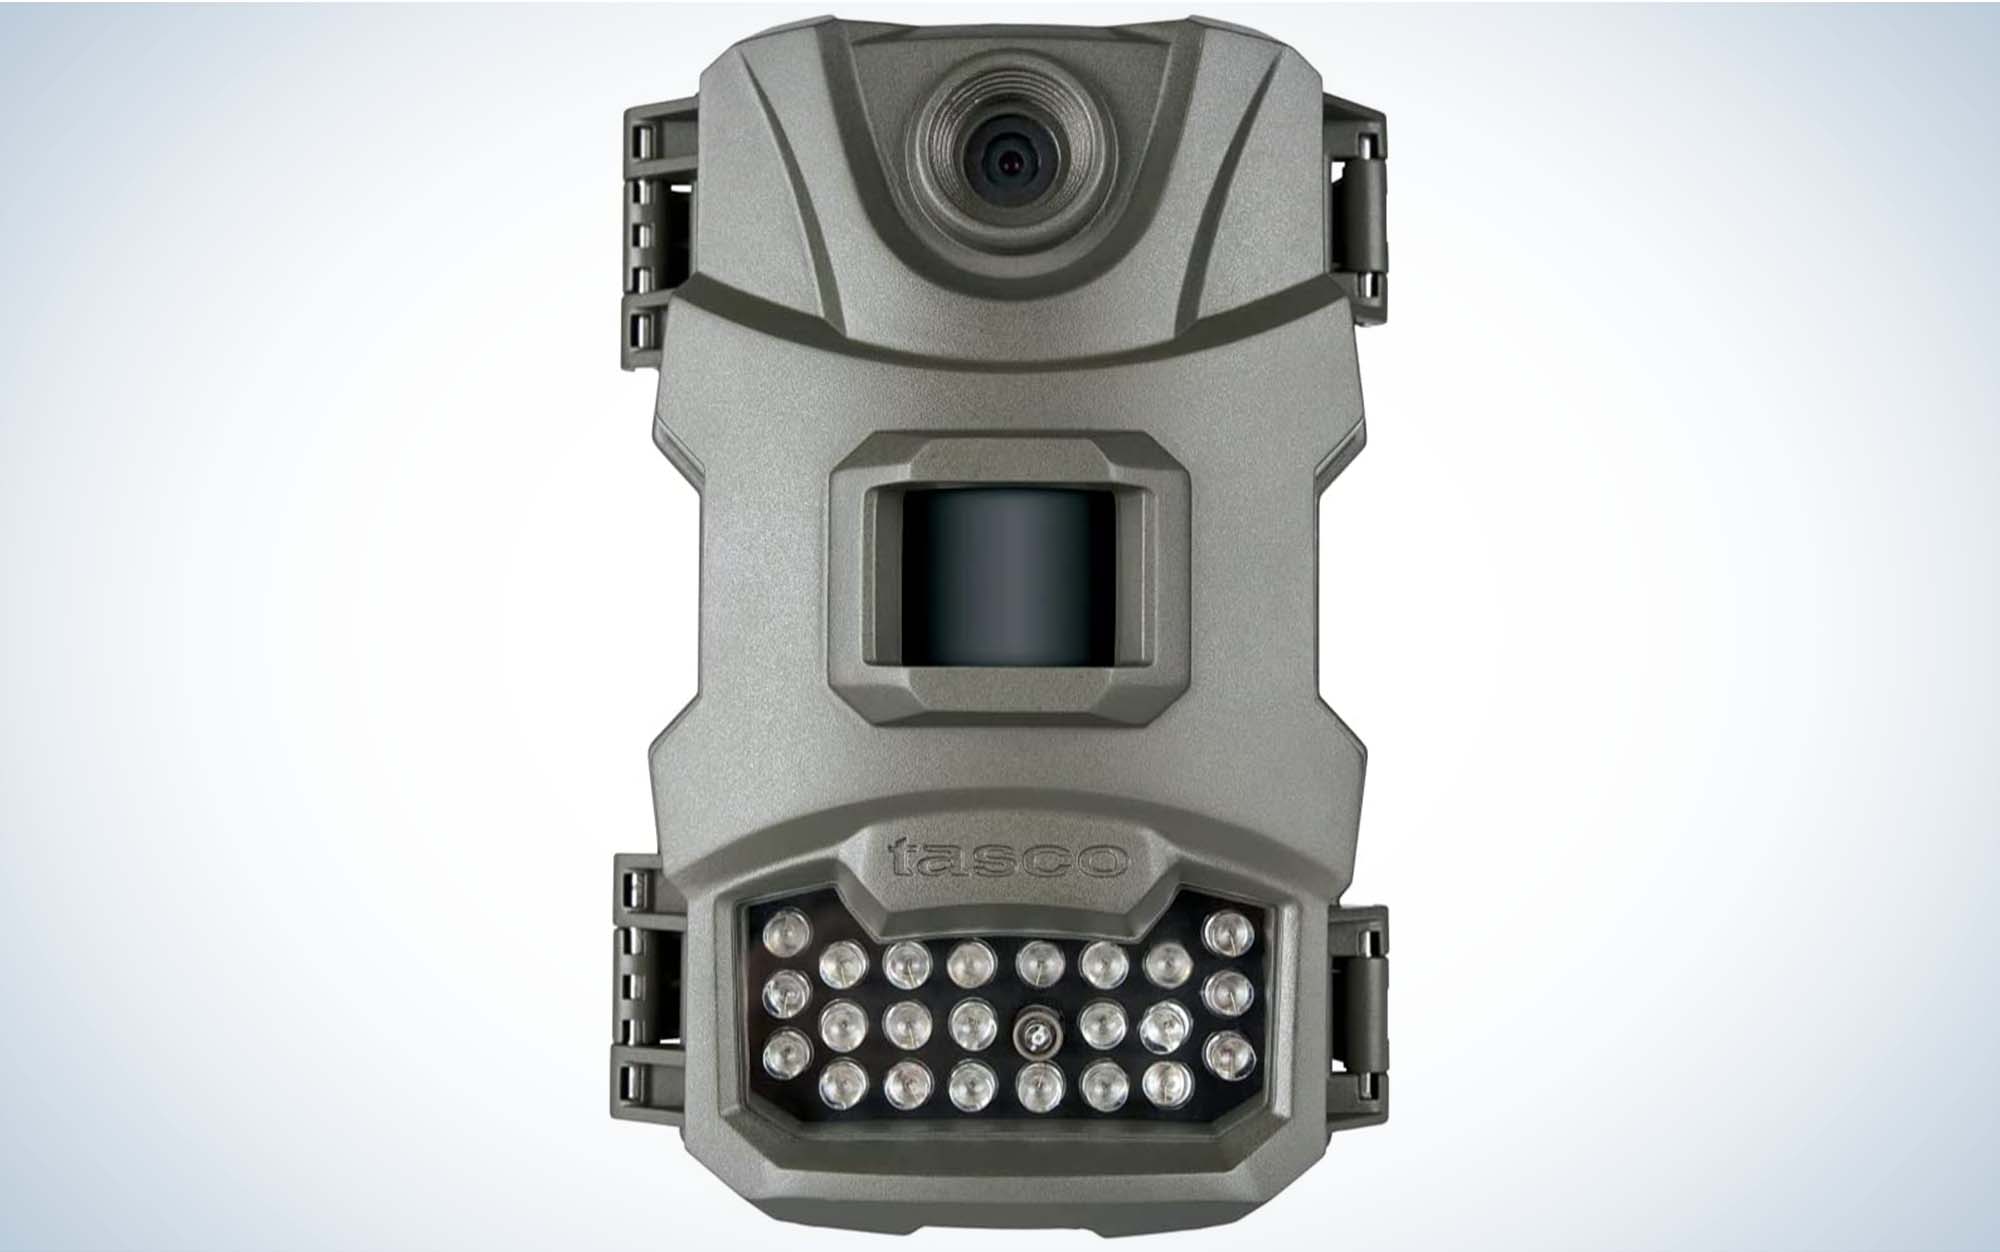 The Tasco 12mp Tan Low-Glow is the best trail camera under $50.